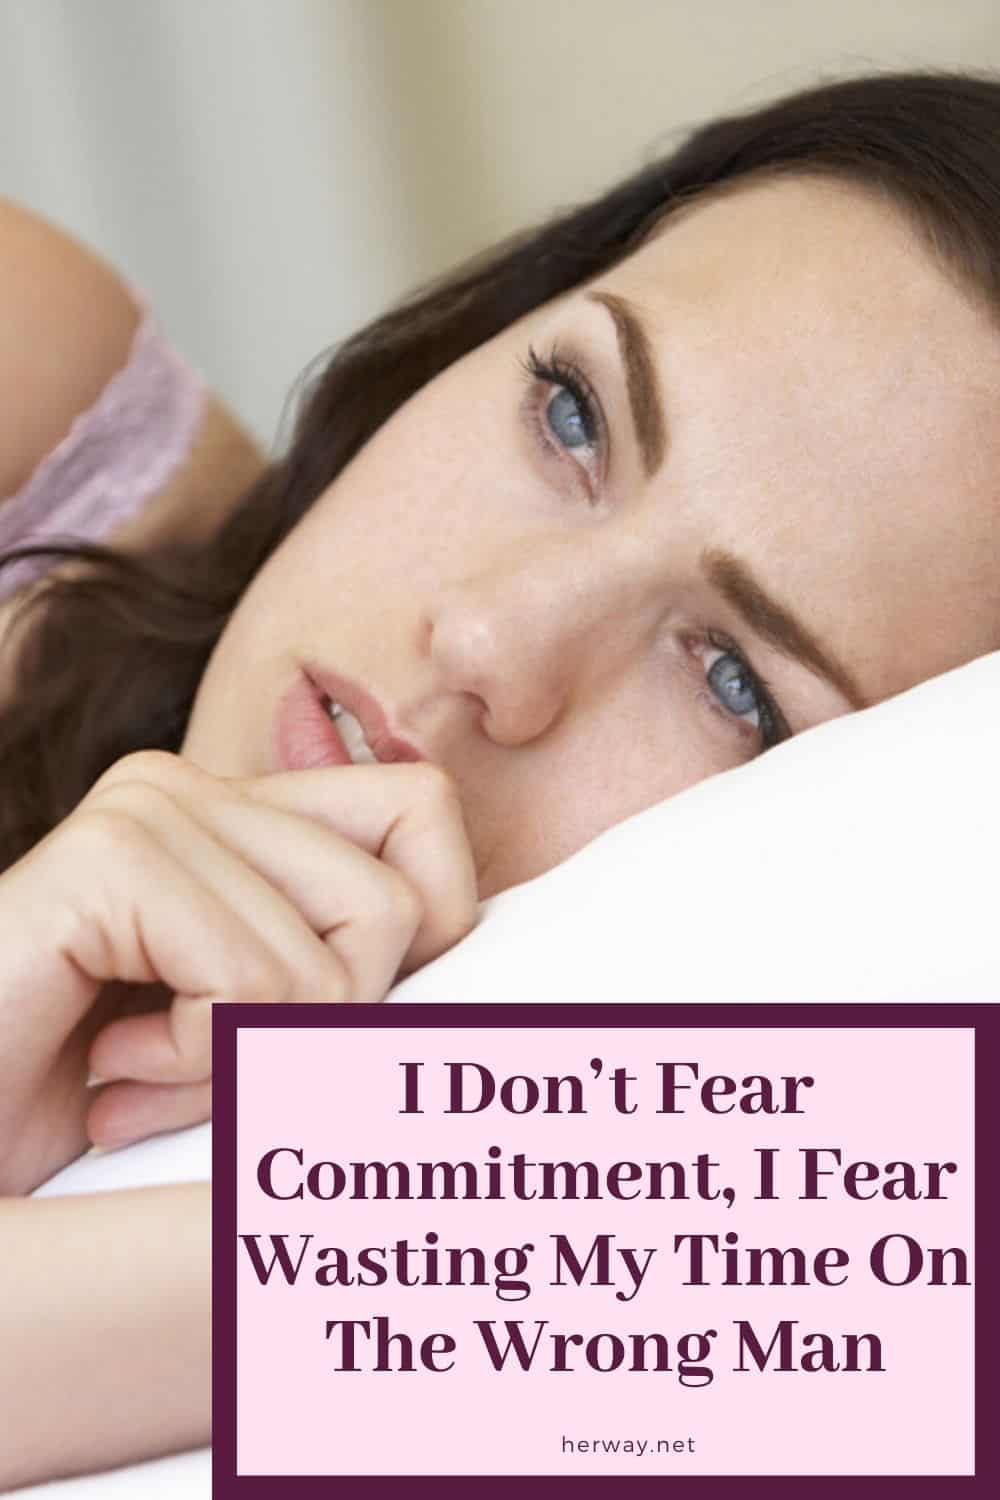 I Don’t Fear Commitment, I Fear Wasting My Time On The Wrong Man